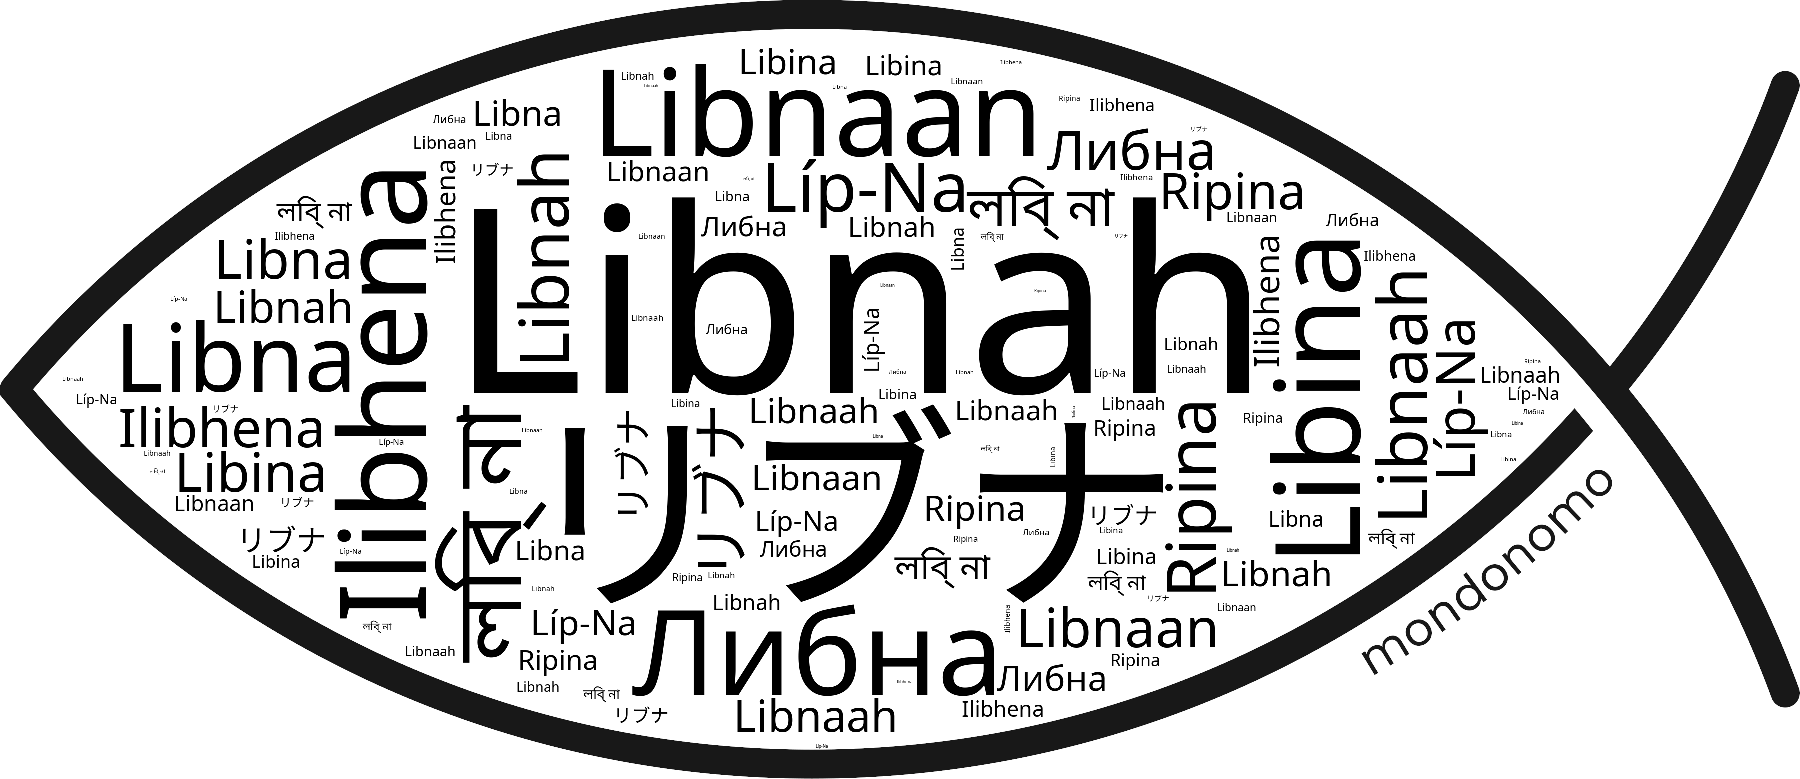 Name Libnah in the world's Bibles